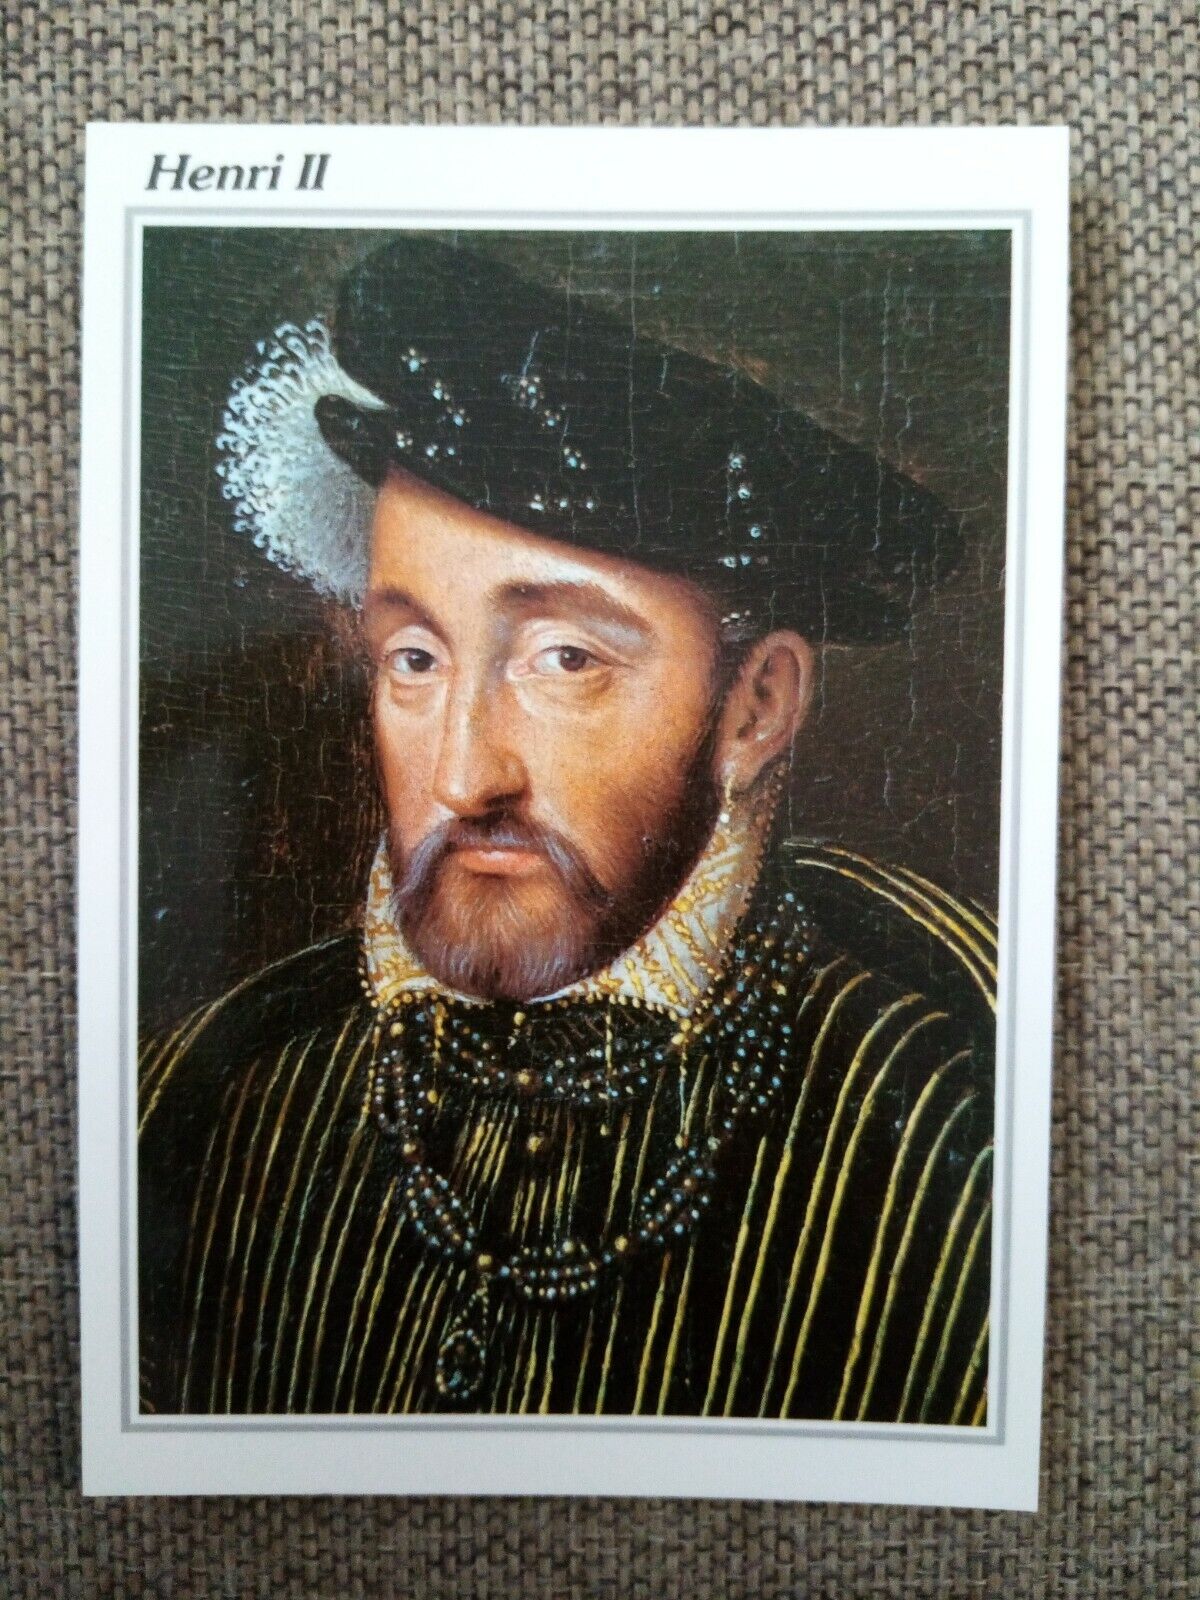 CPSM CPM KING OF FRANCE CARD PORTRAIT OF HENRI II 